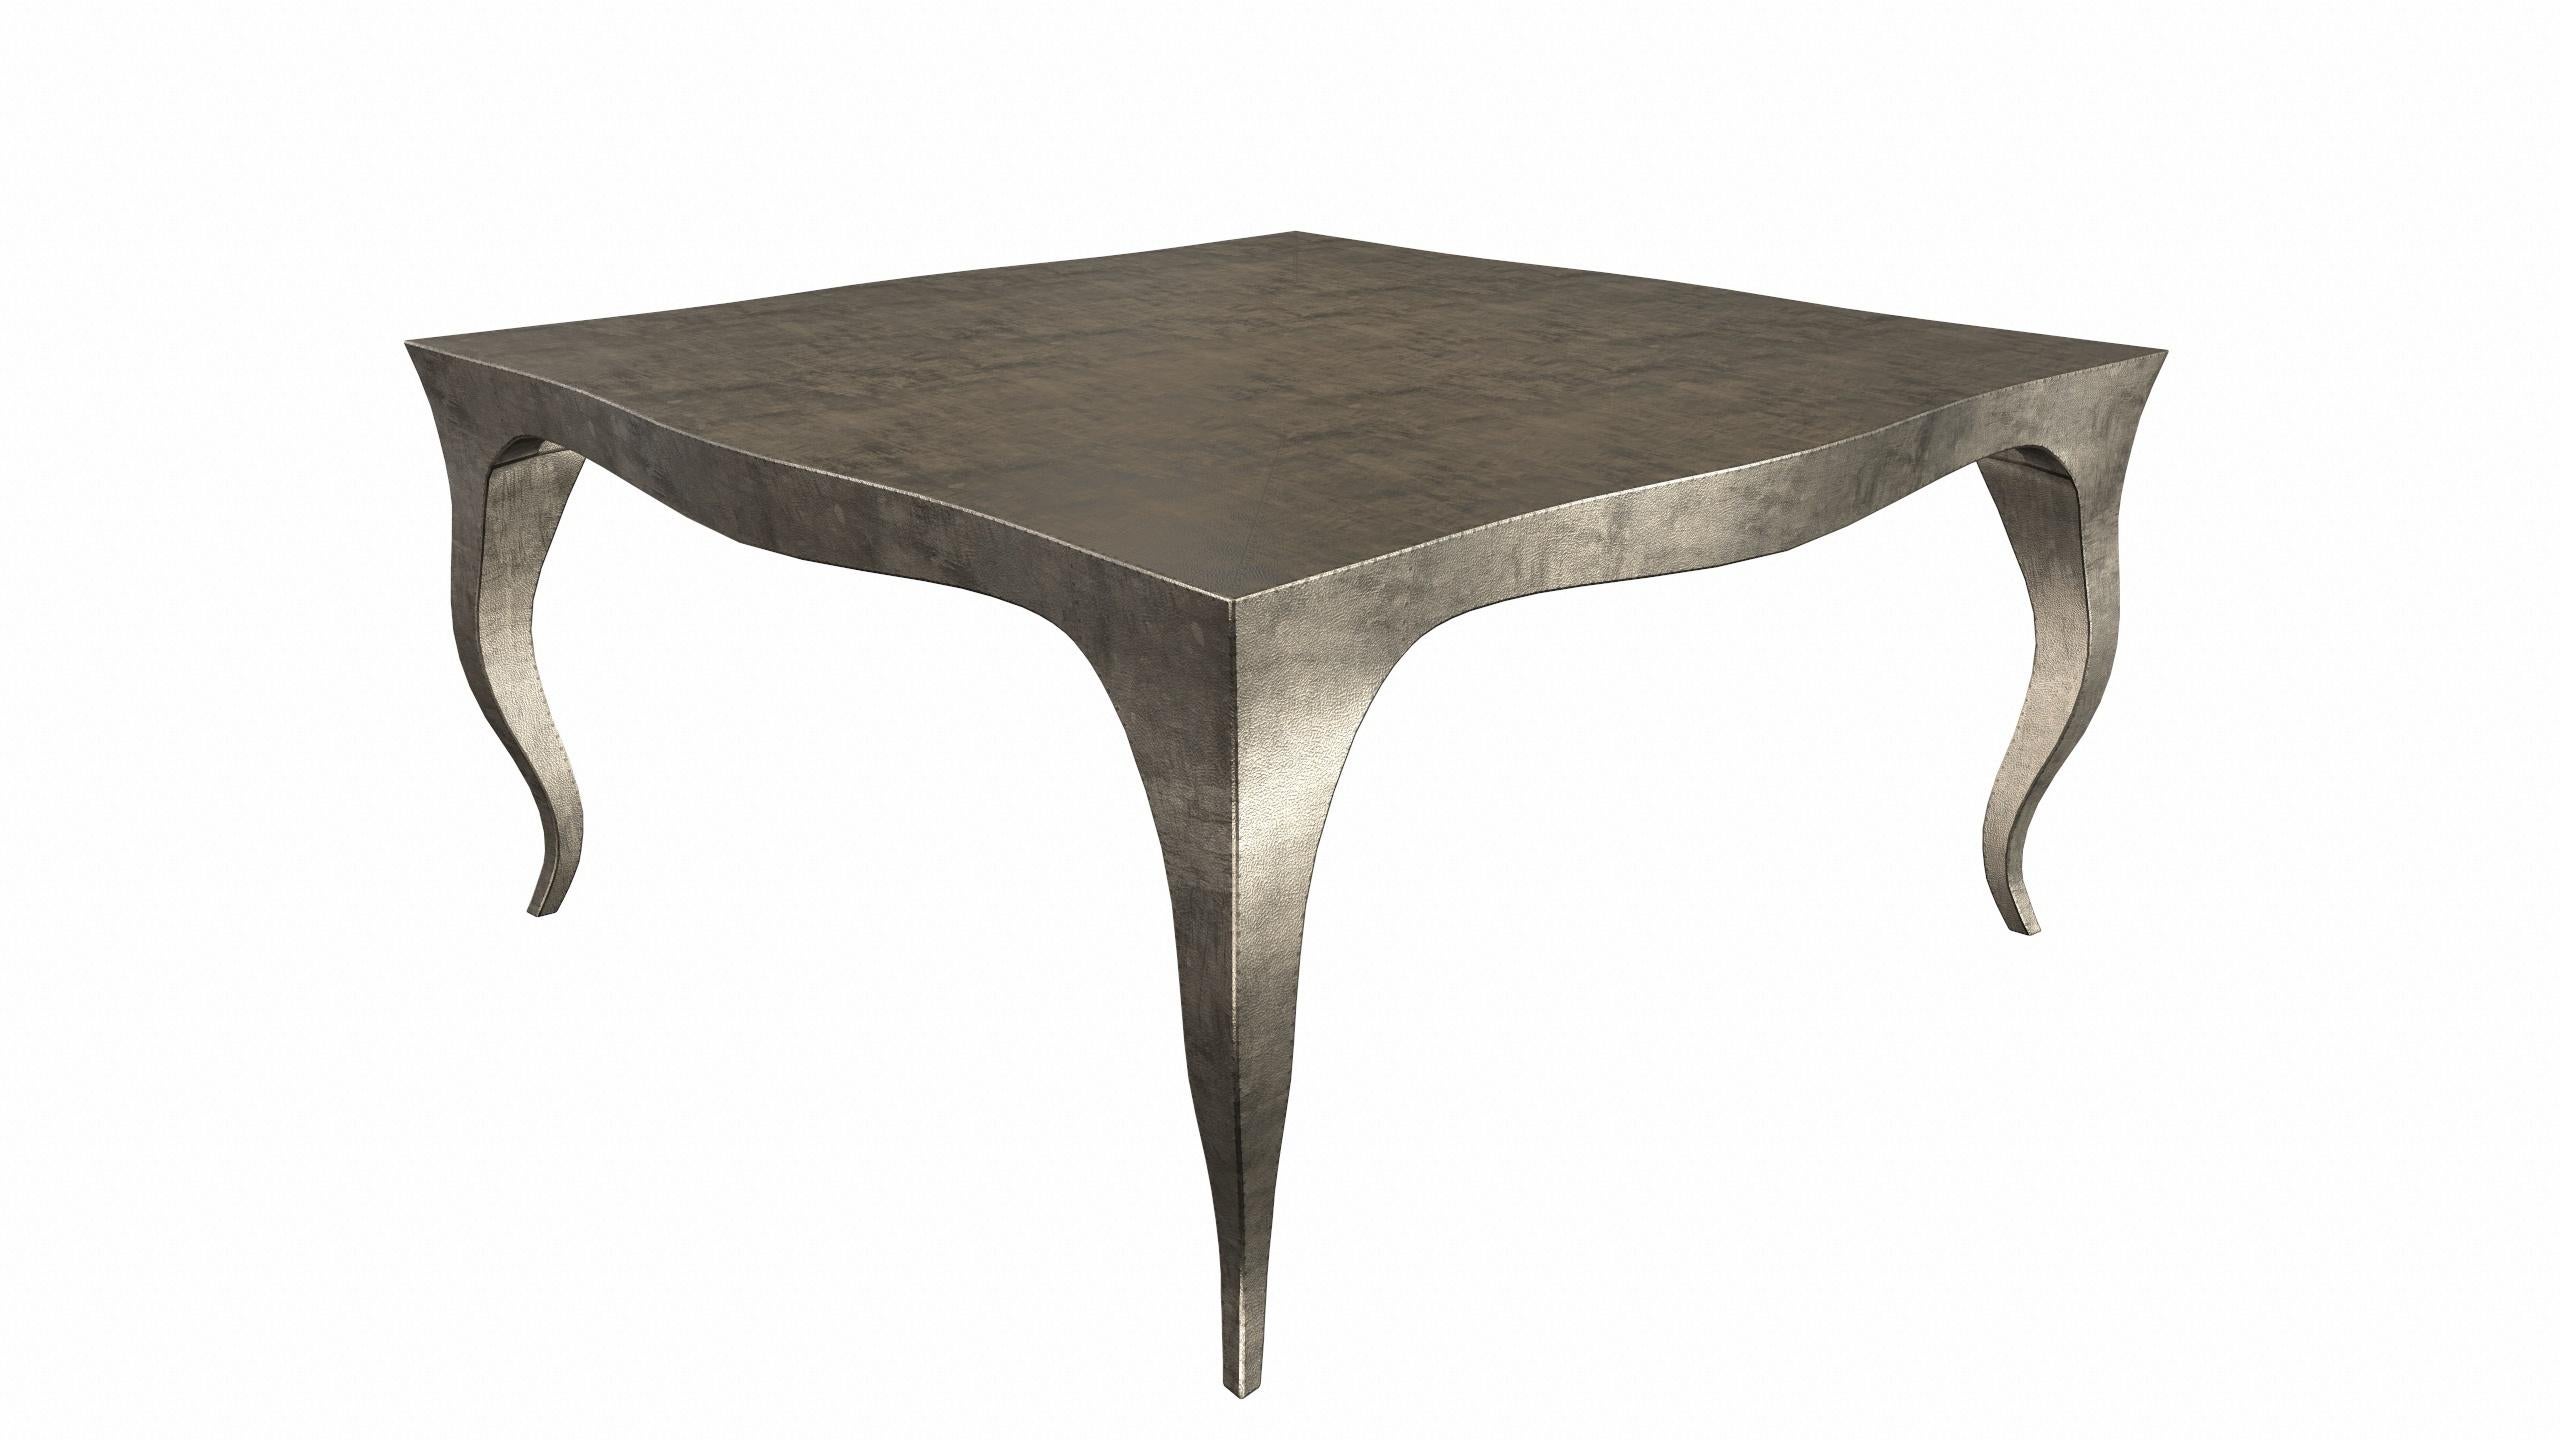 American Louise Art Deco Center Tables Fine Hammered Antique Bronze  18.5x18.5x10 inch For Sale